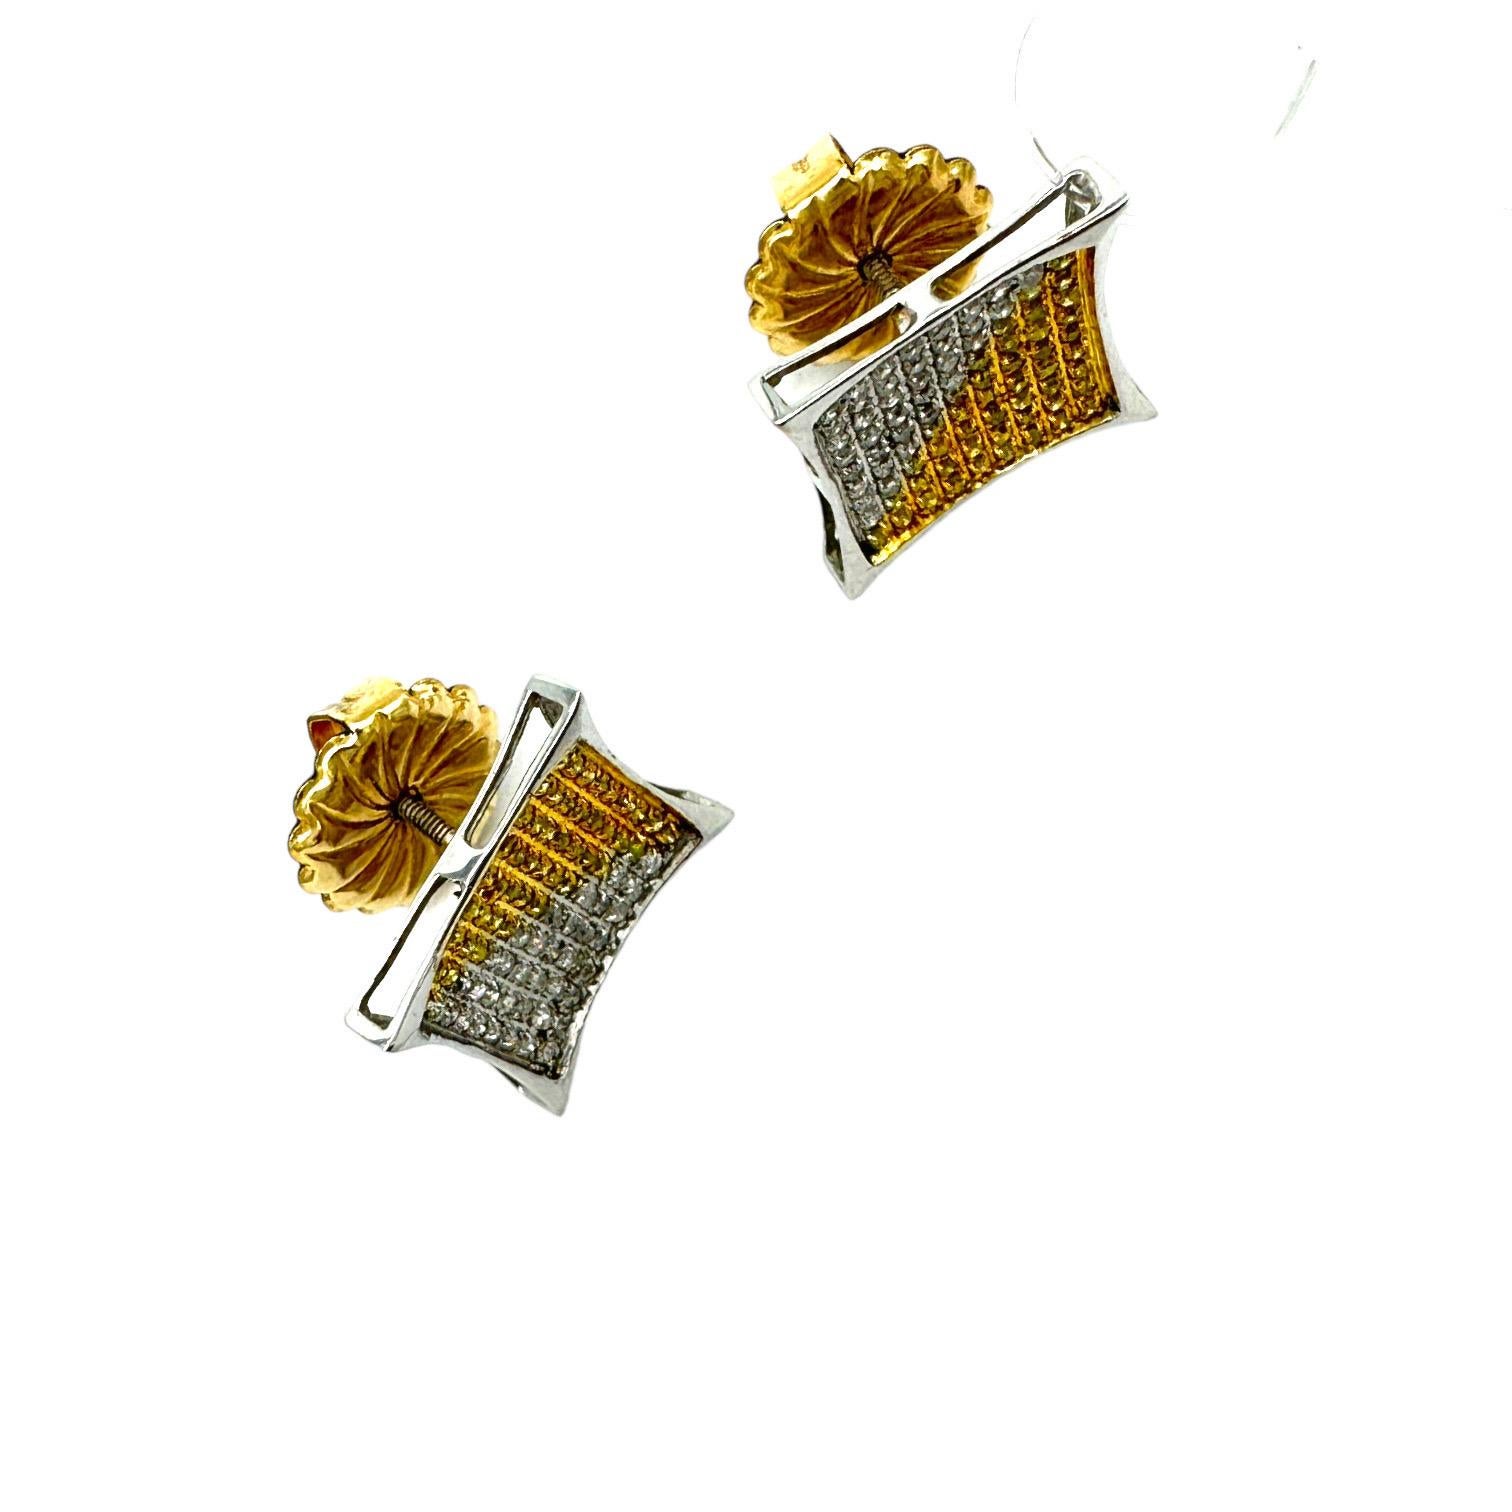 These dynamic pave diamond earrings feature yellow and white diamond set stones; yellow and white are in a tri-angle shape in a secure outer bezel. The pave setting measures 13mm in diameter and are .50 carat in total diamond weight. The post is a